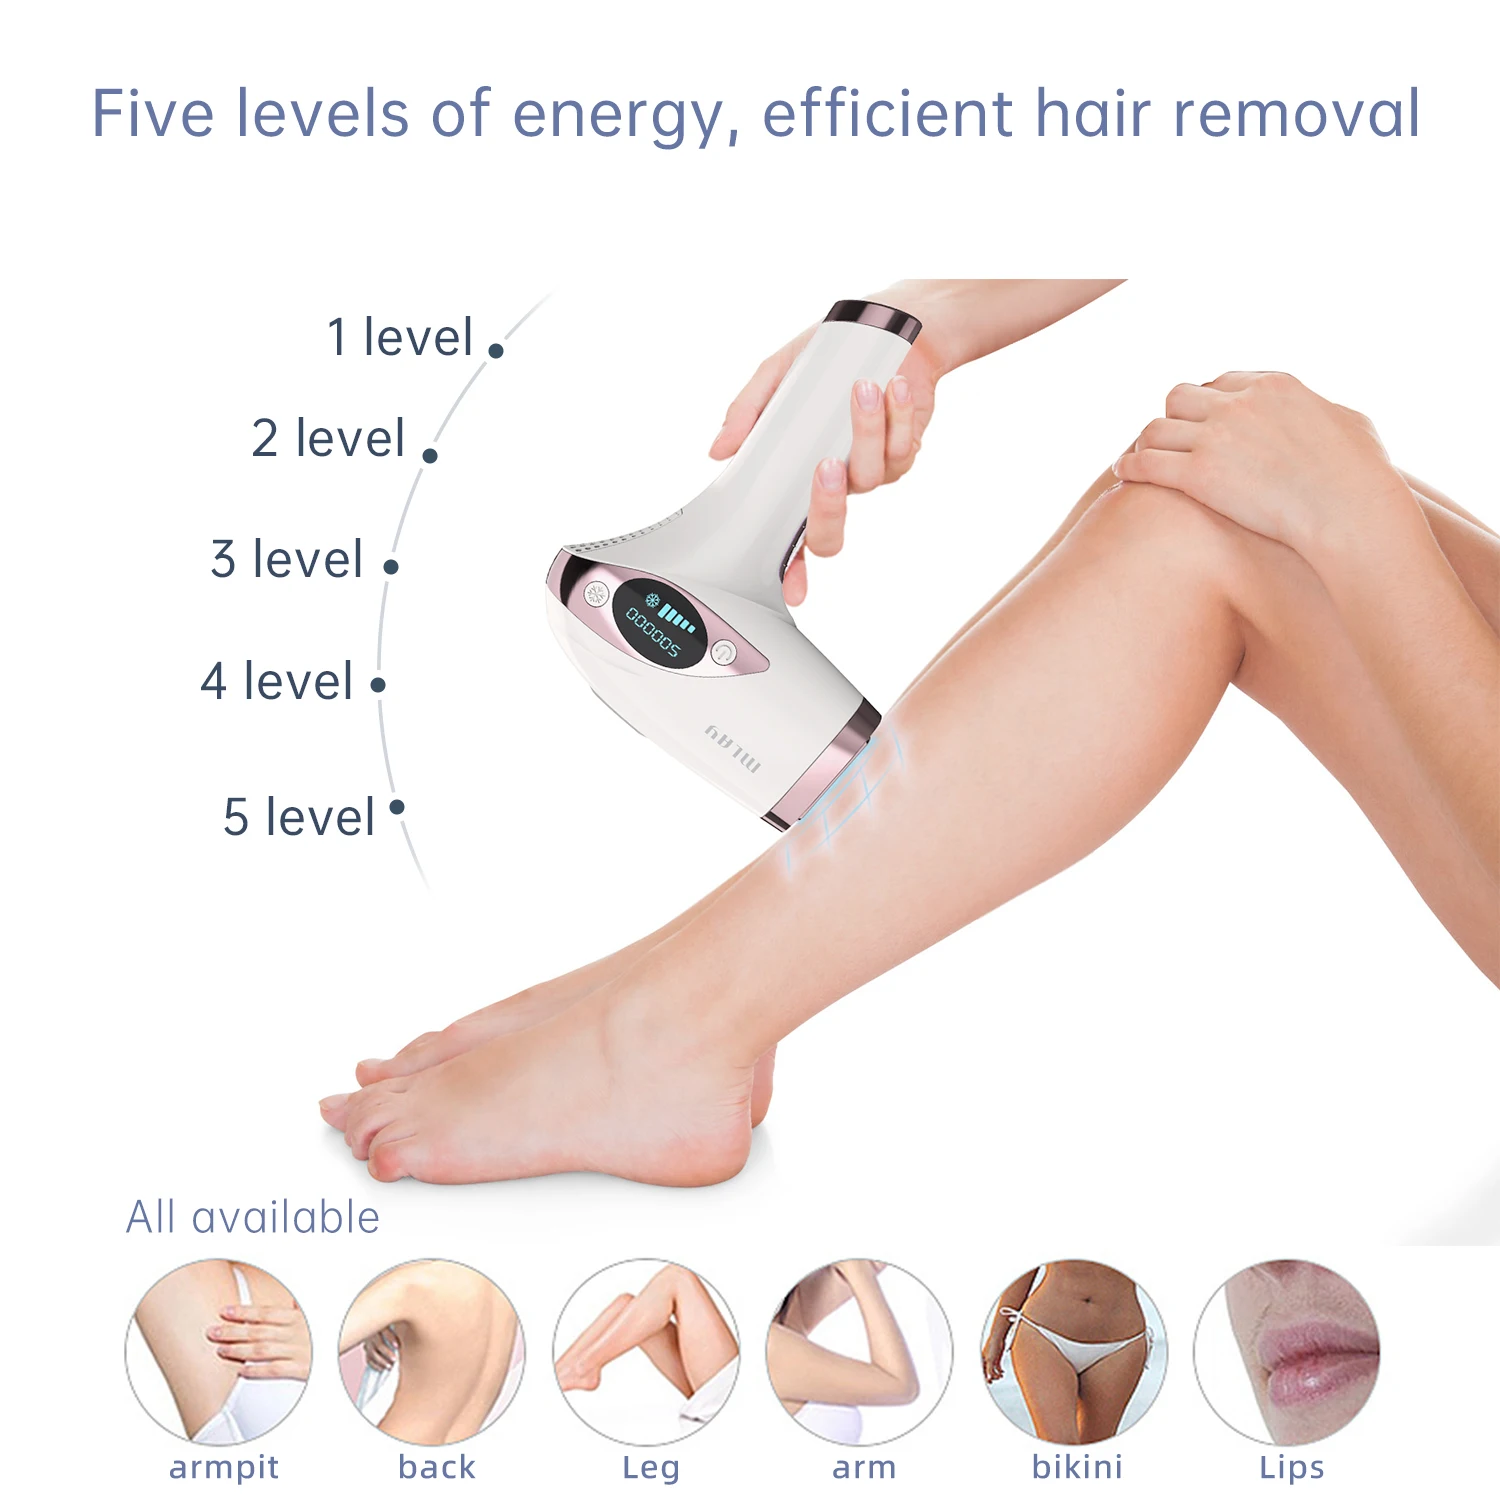 MLAY T4 Professional LCD Display IPL Hair Removal Device Permanent Laser Epilator Women's Bikini Area Face Body Home Use UK/US